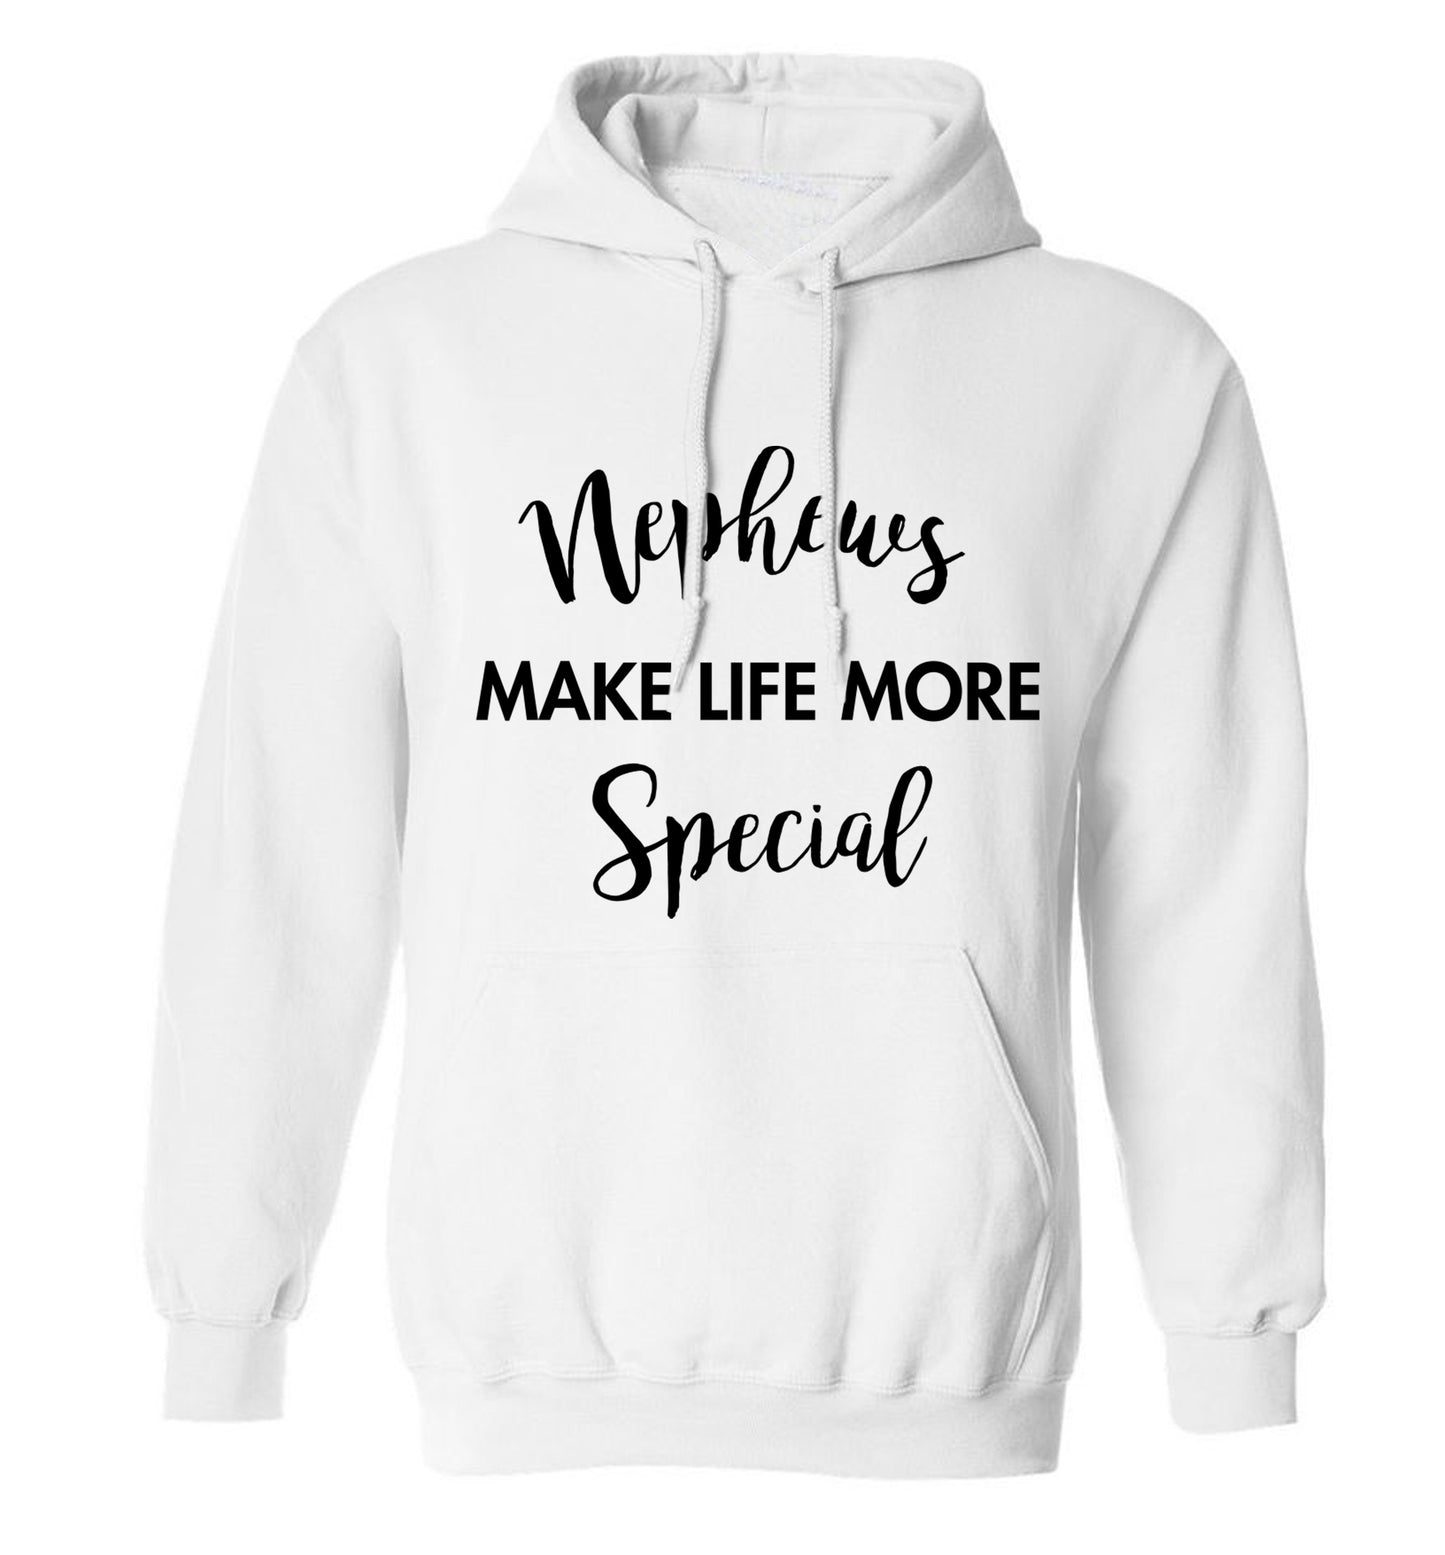 Nephews make life more special adults unisex white hoodie 2XL